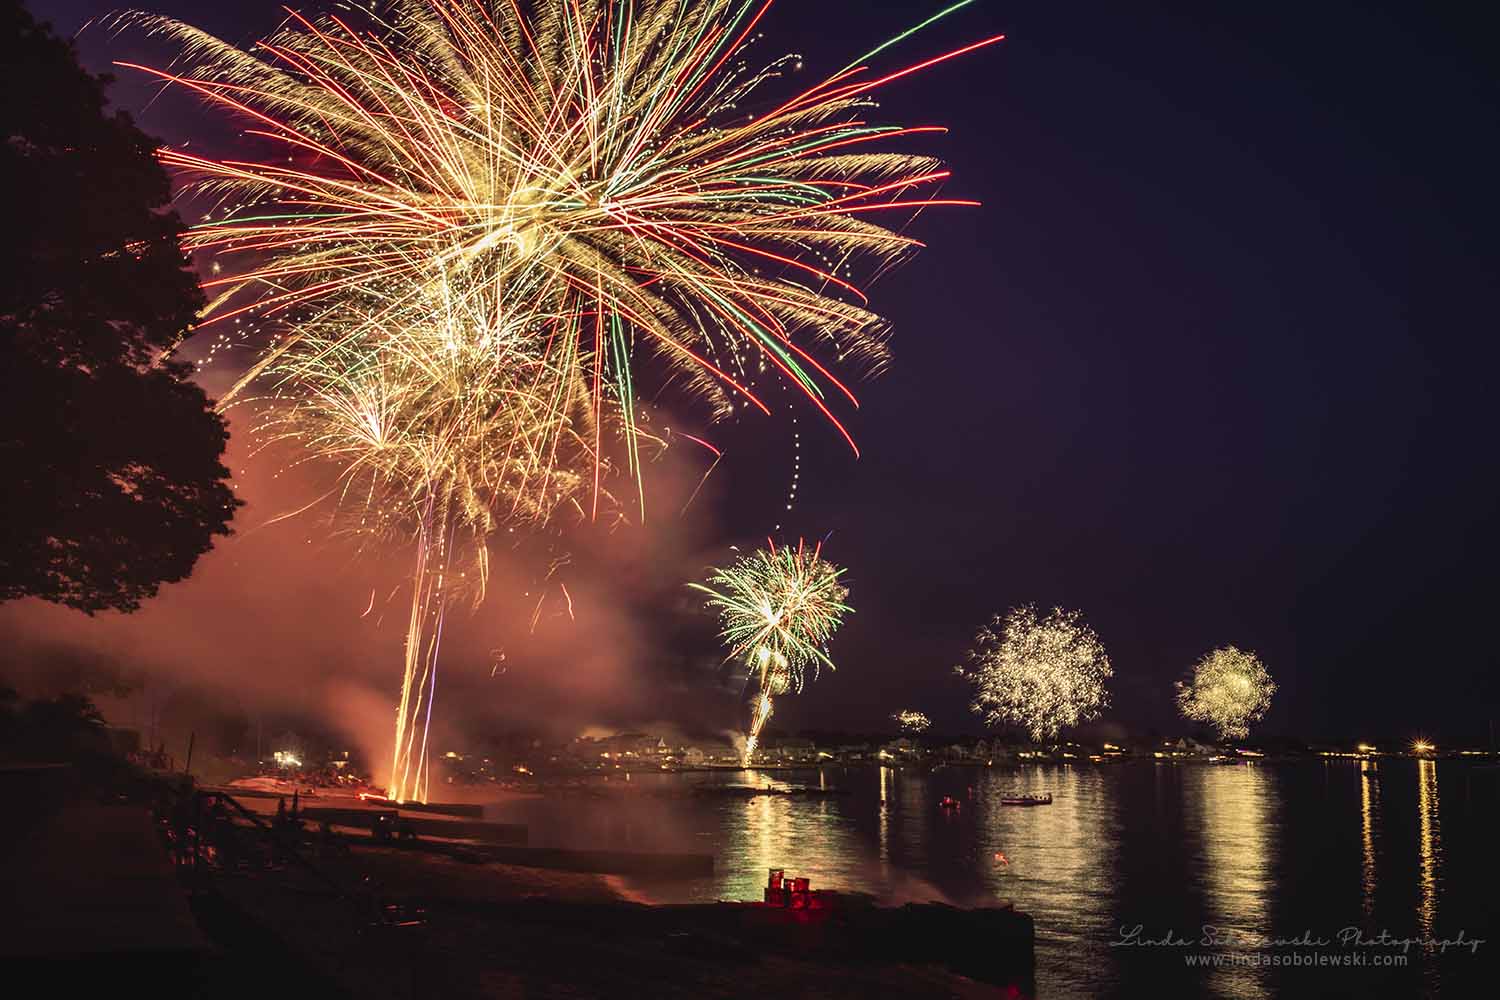 fireworks on the 4th of July, chapman beach, westbrook ct photographer